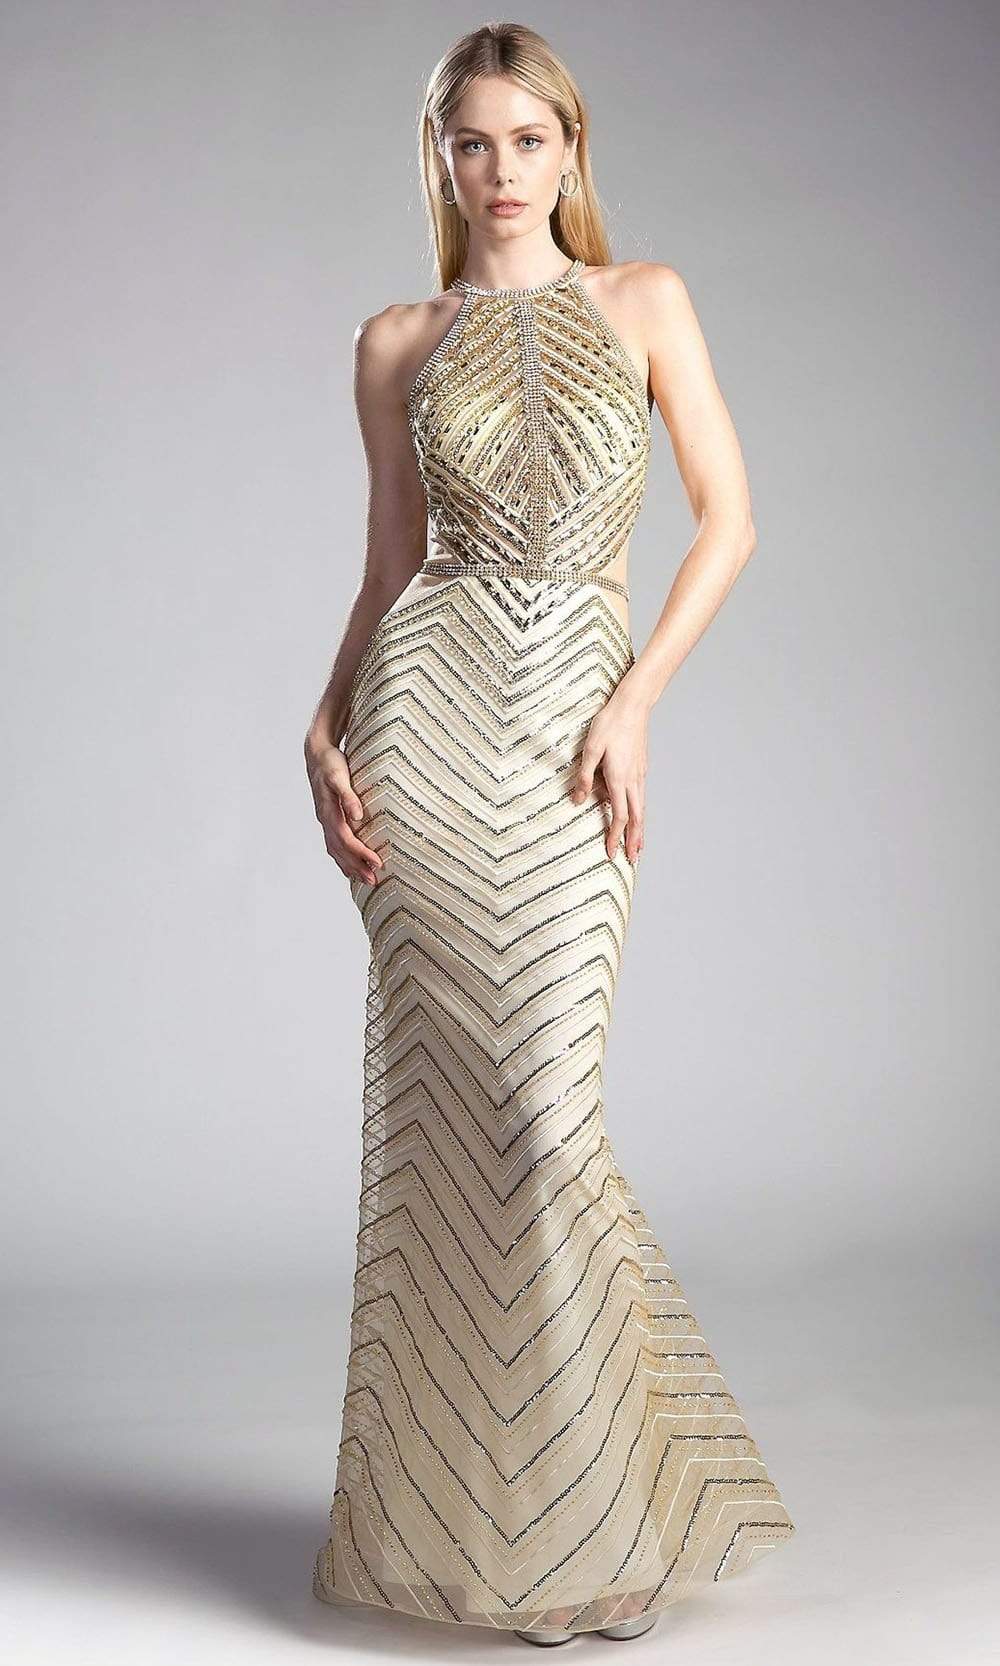 Cinderella Divine - CZ0010 Beaded Chevron Motif Long Mermaid Gown Special Occasion Dress 2 / Gold